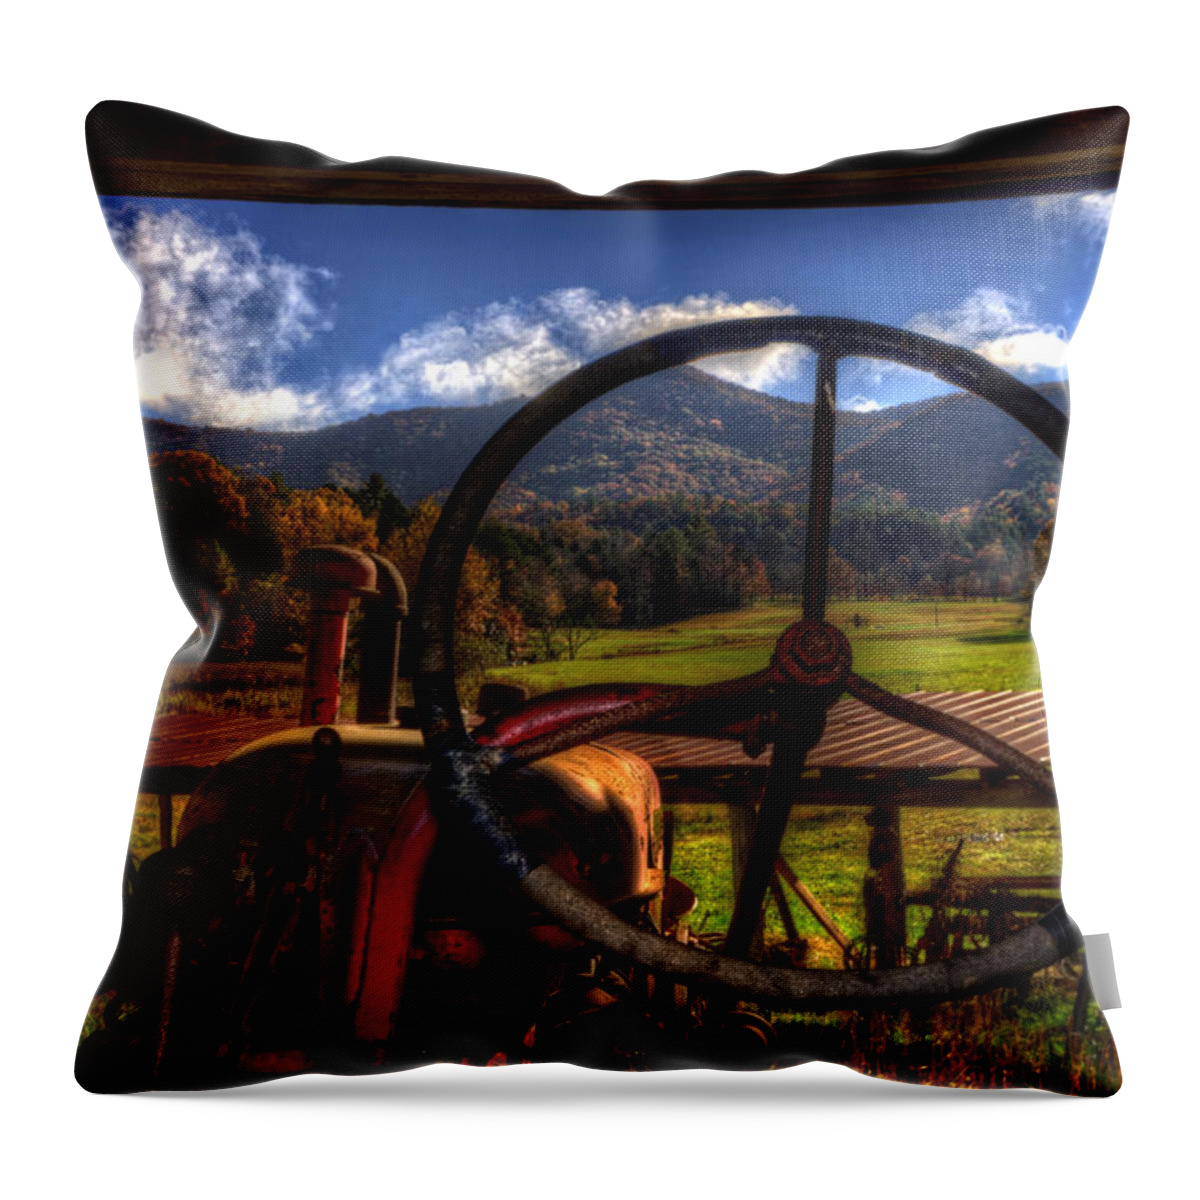 Western North Carolina Mountains Throw Pillow featuring the photograph Mountain Farm View by Greg and Chrystal Mimbs